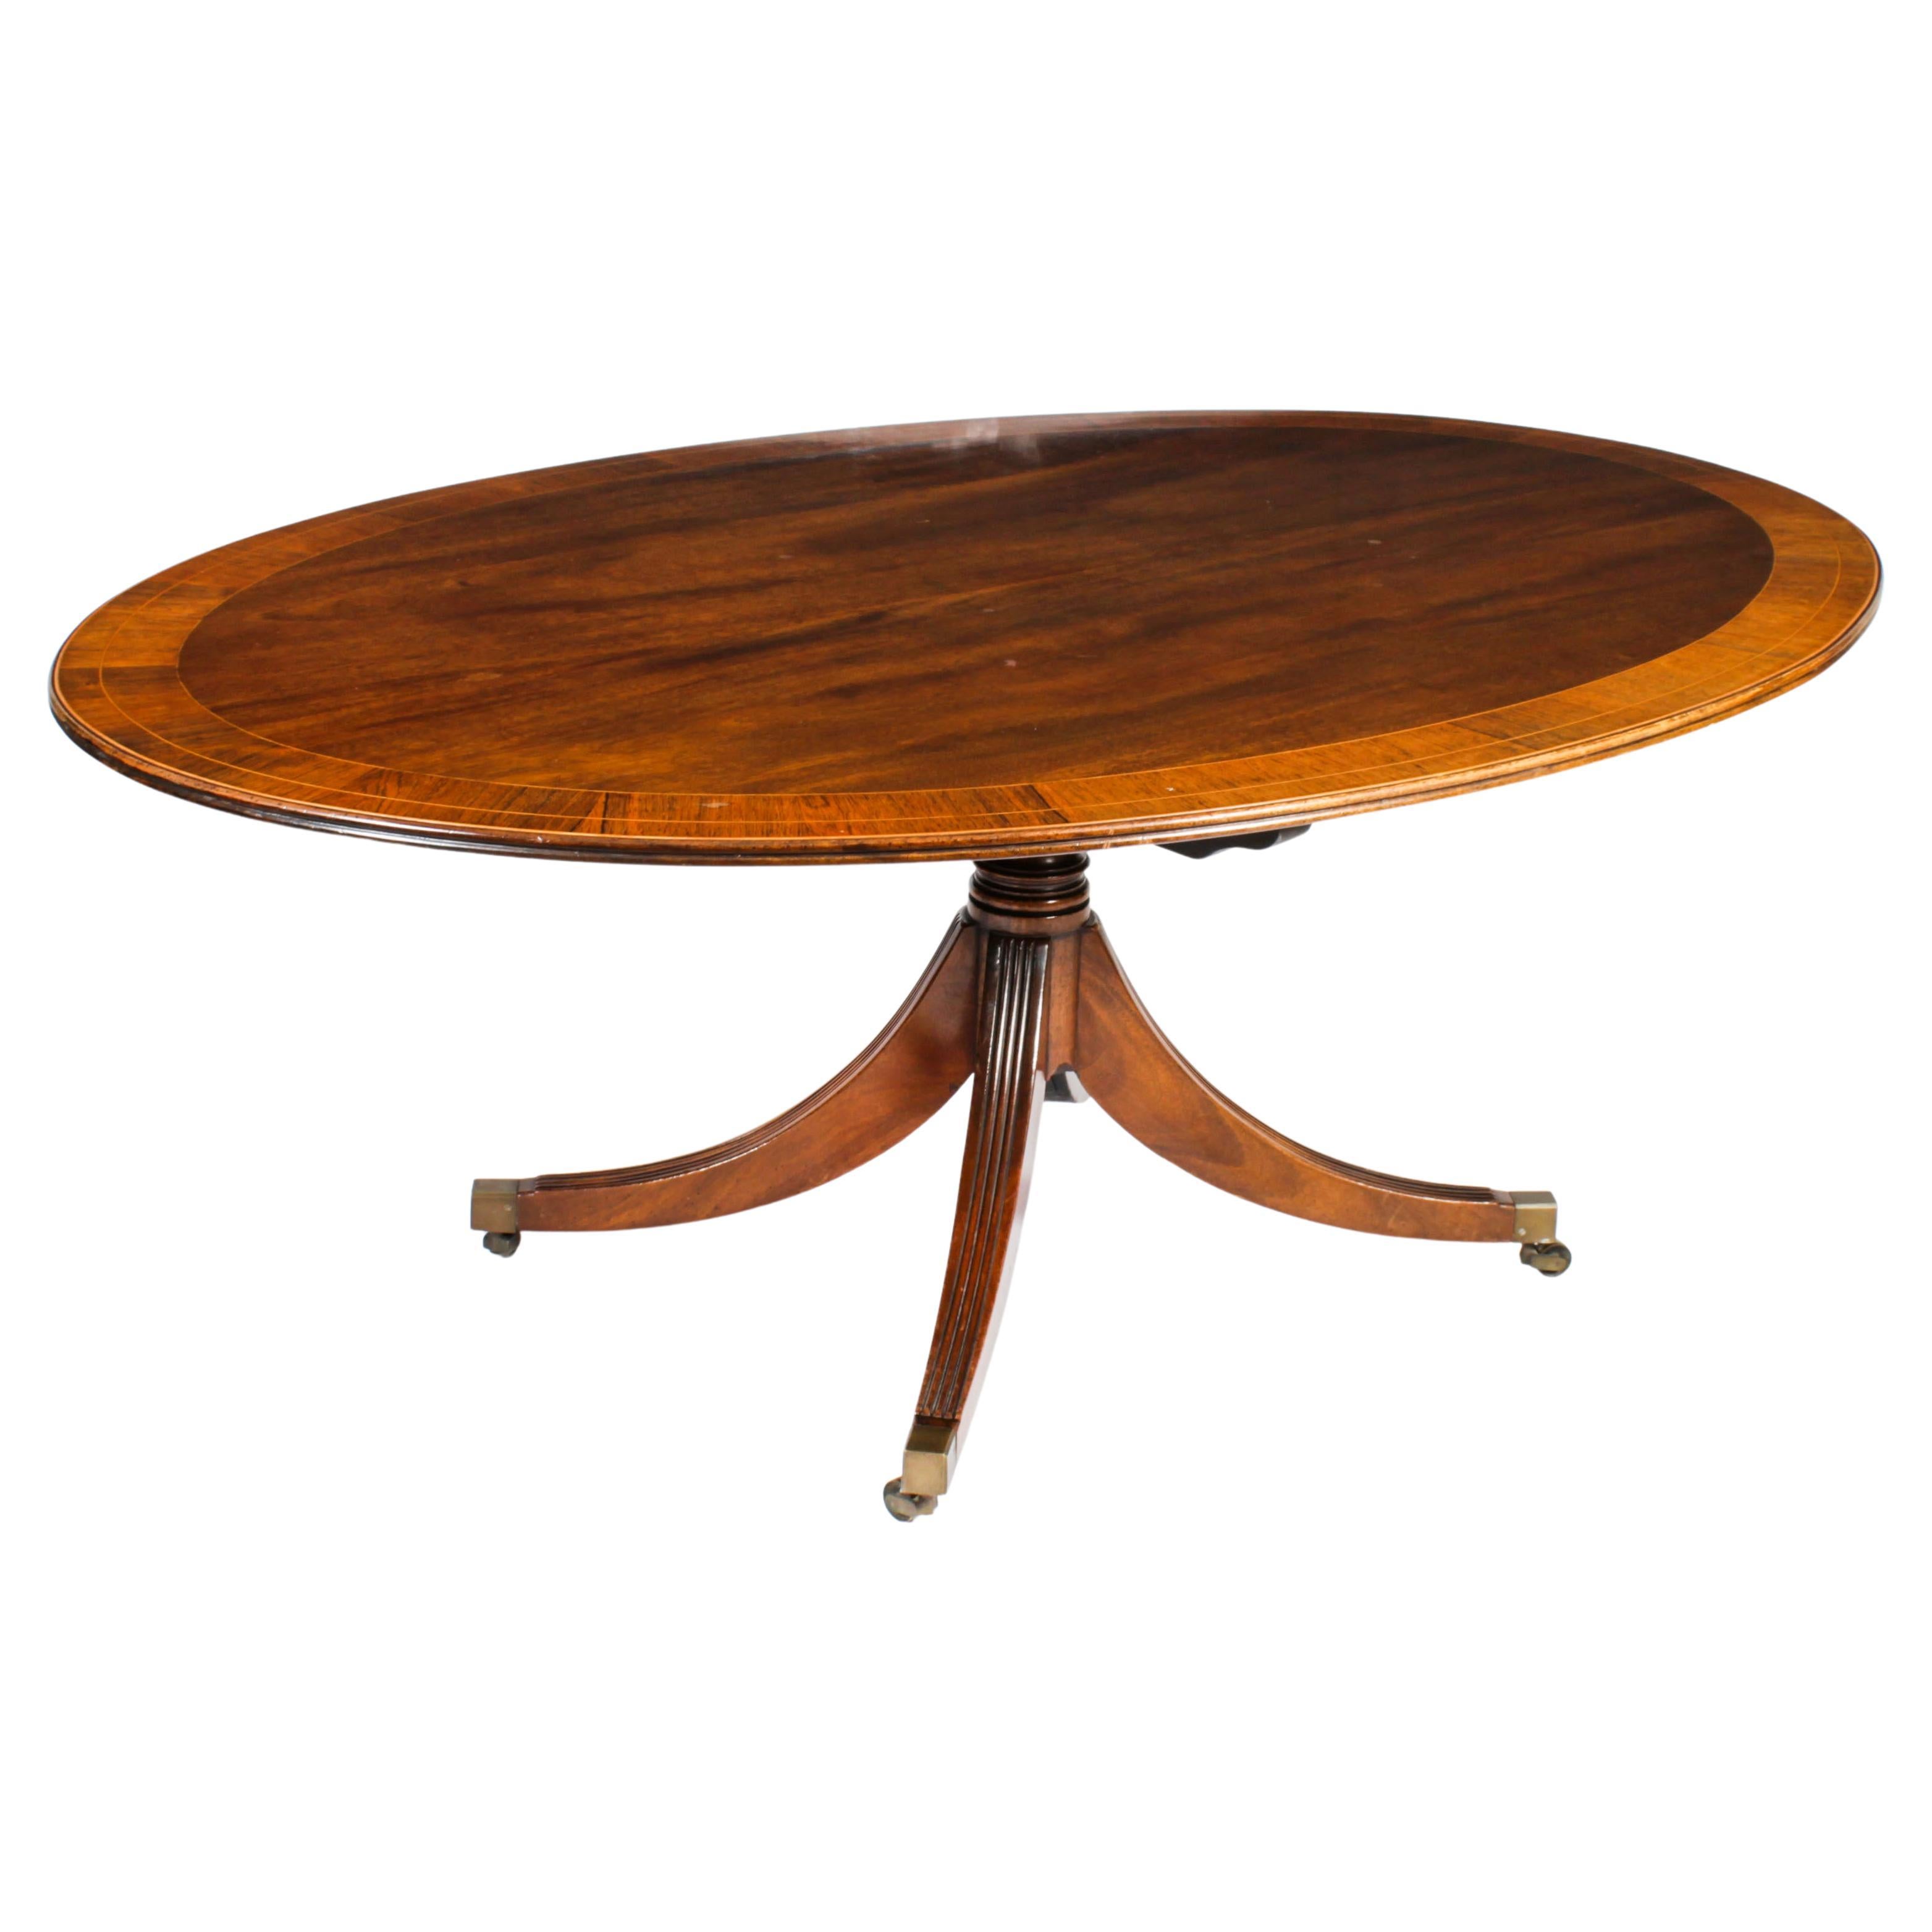 Antique Oval Mahogany Dining Table 1920s